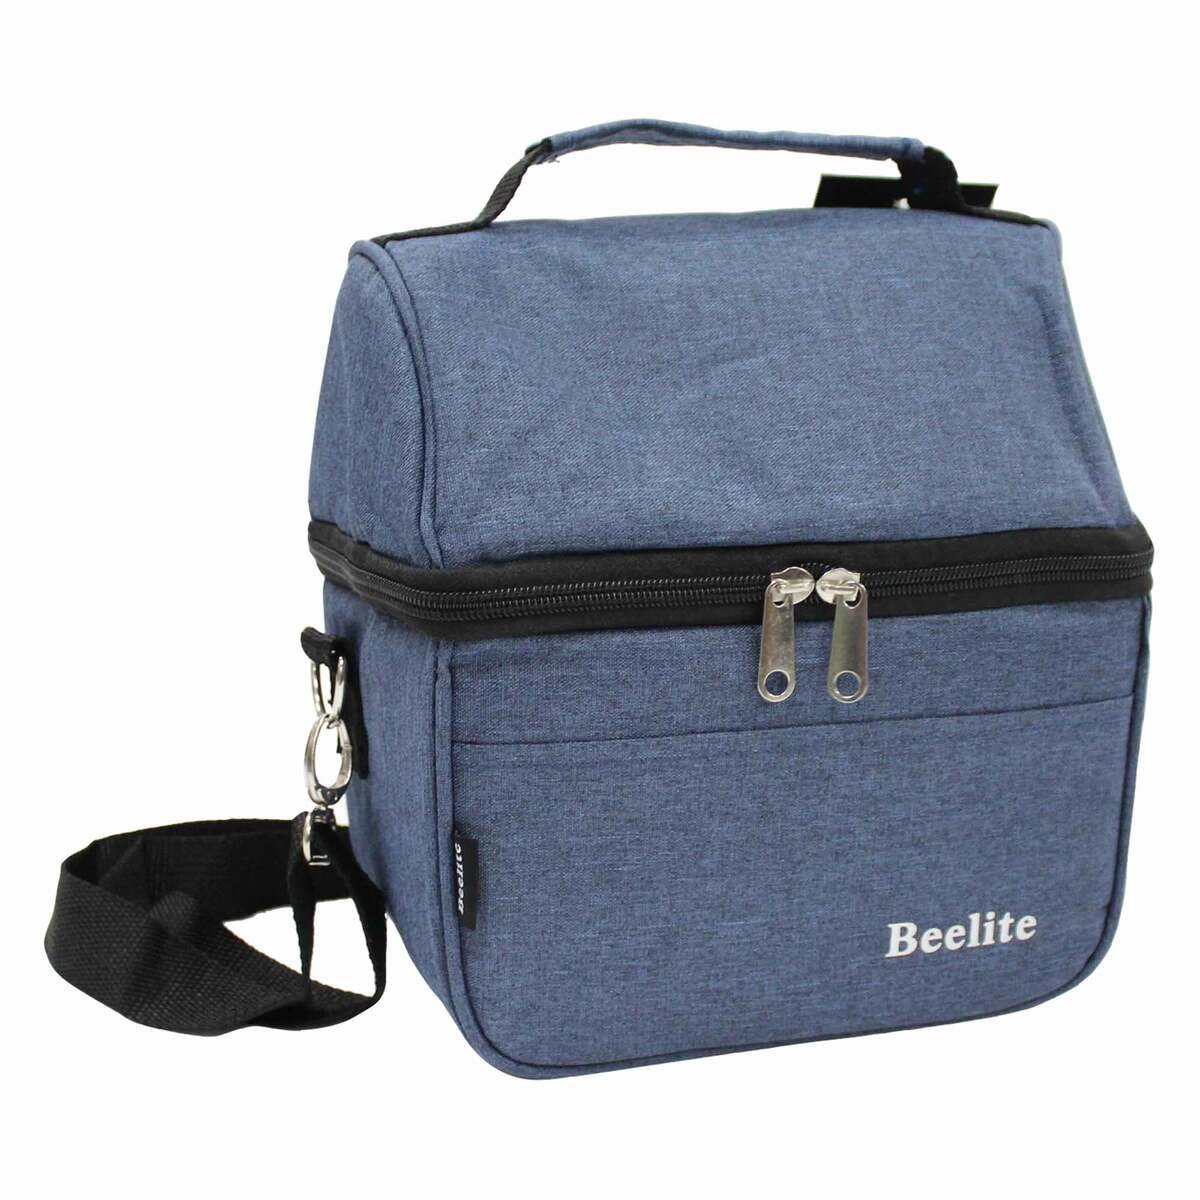 Shop Others Products Online - Bag Accessories